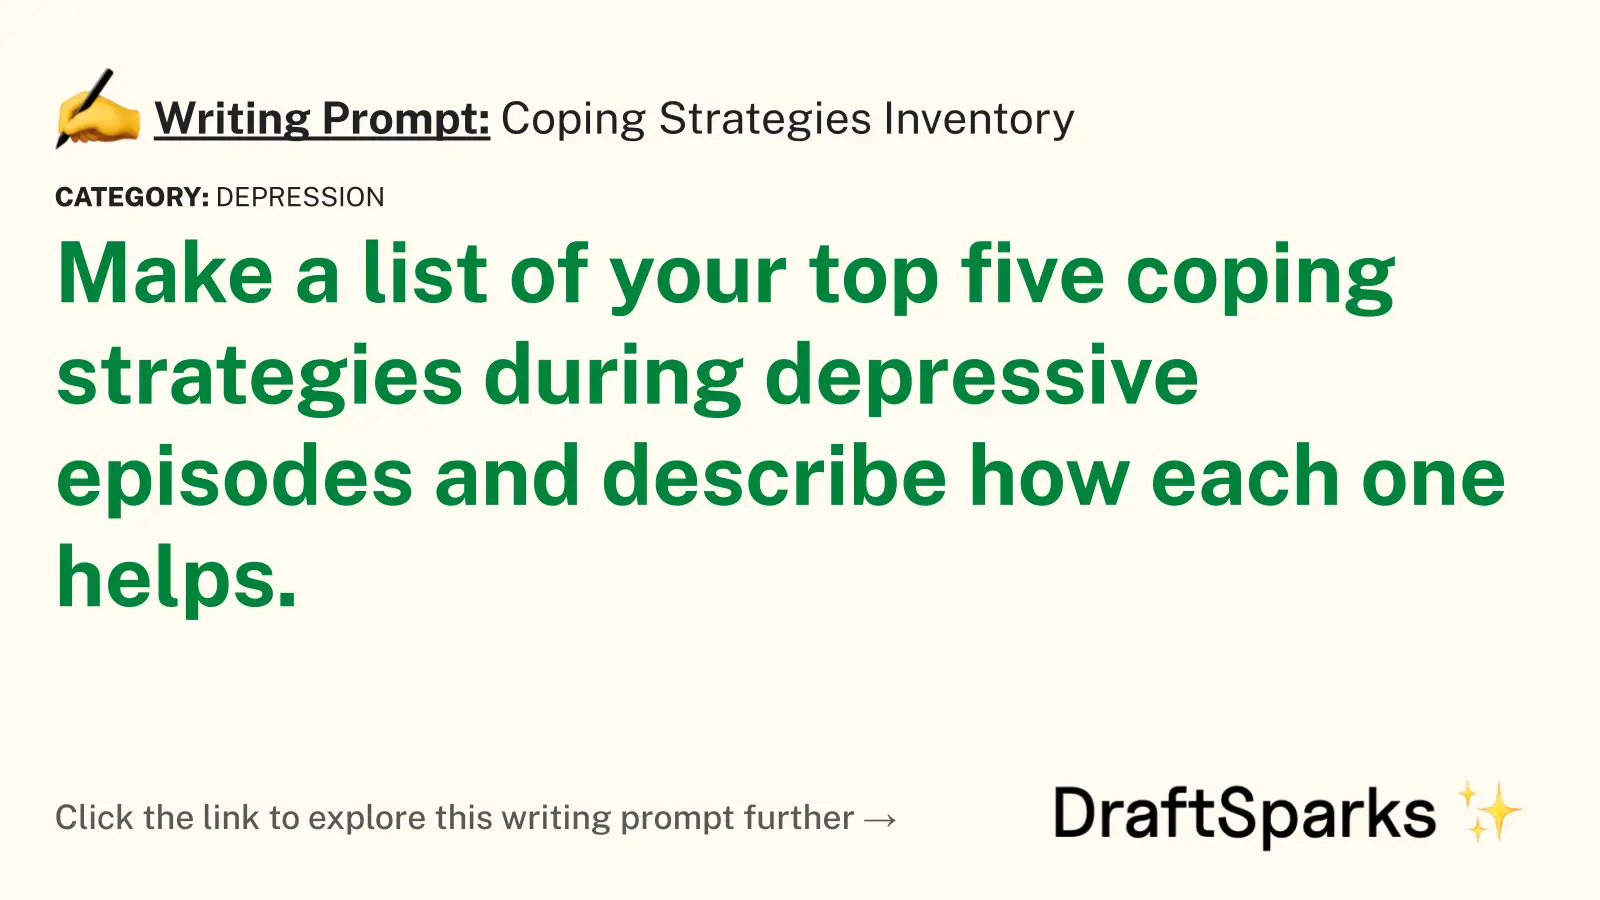 Coping Strategies Inventory